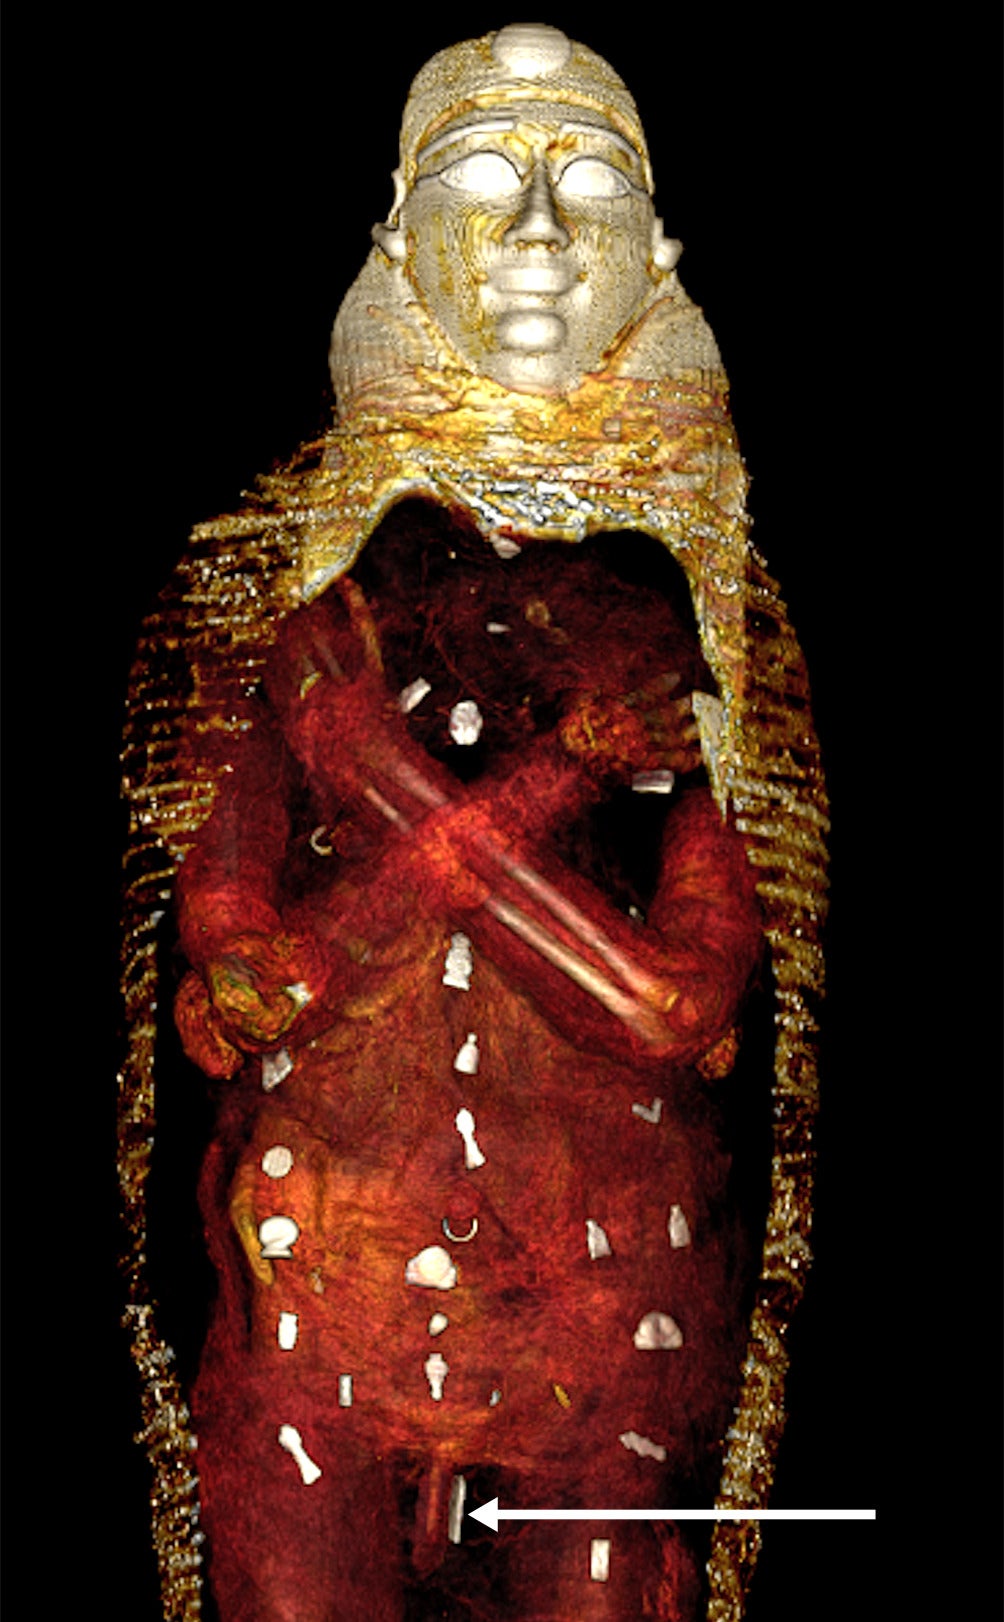 A CT scan reveals the amulets spread across the mummy, with a detail on the amulet on his penis. (Image: SN Saleem, SA Seddik, M el-Halwagy)